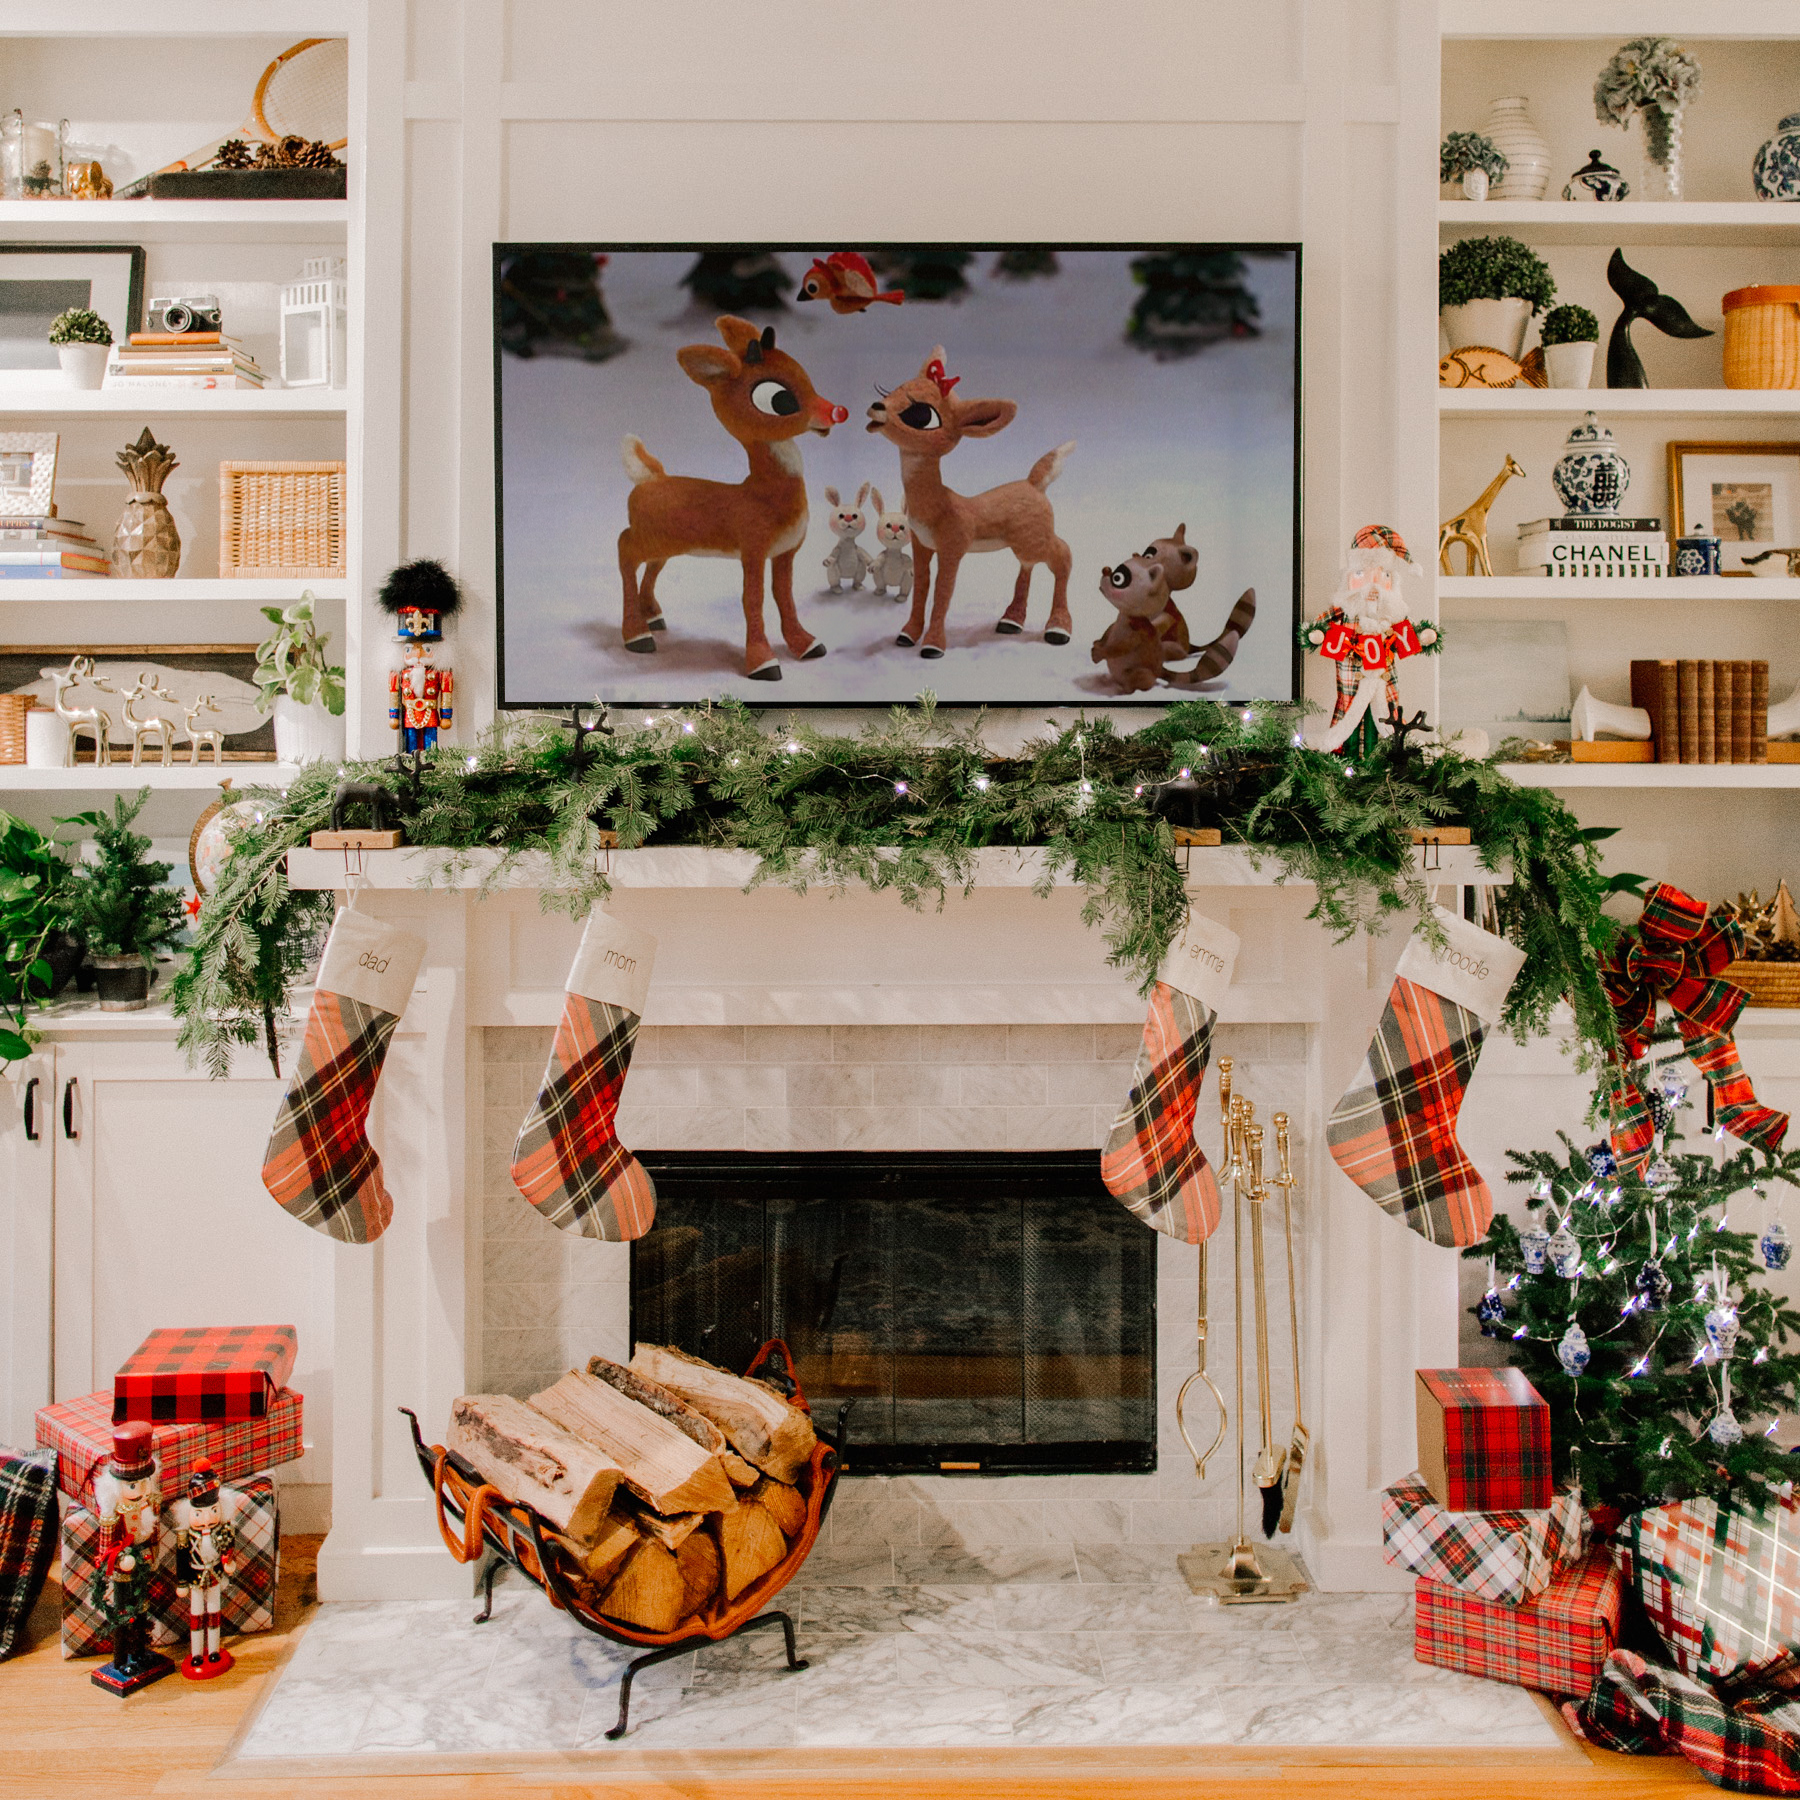 5 Tips for Creating a Festive Fireplace